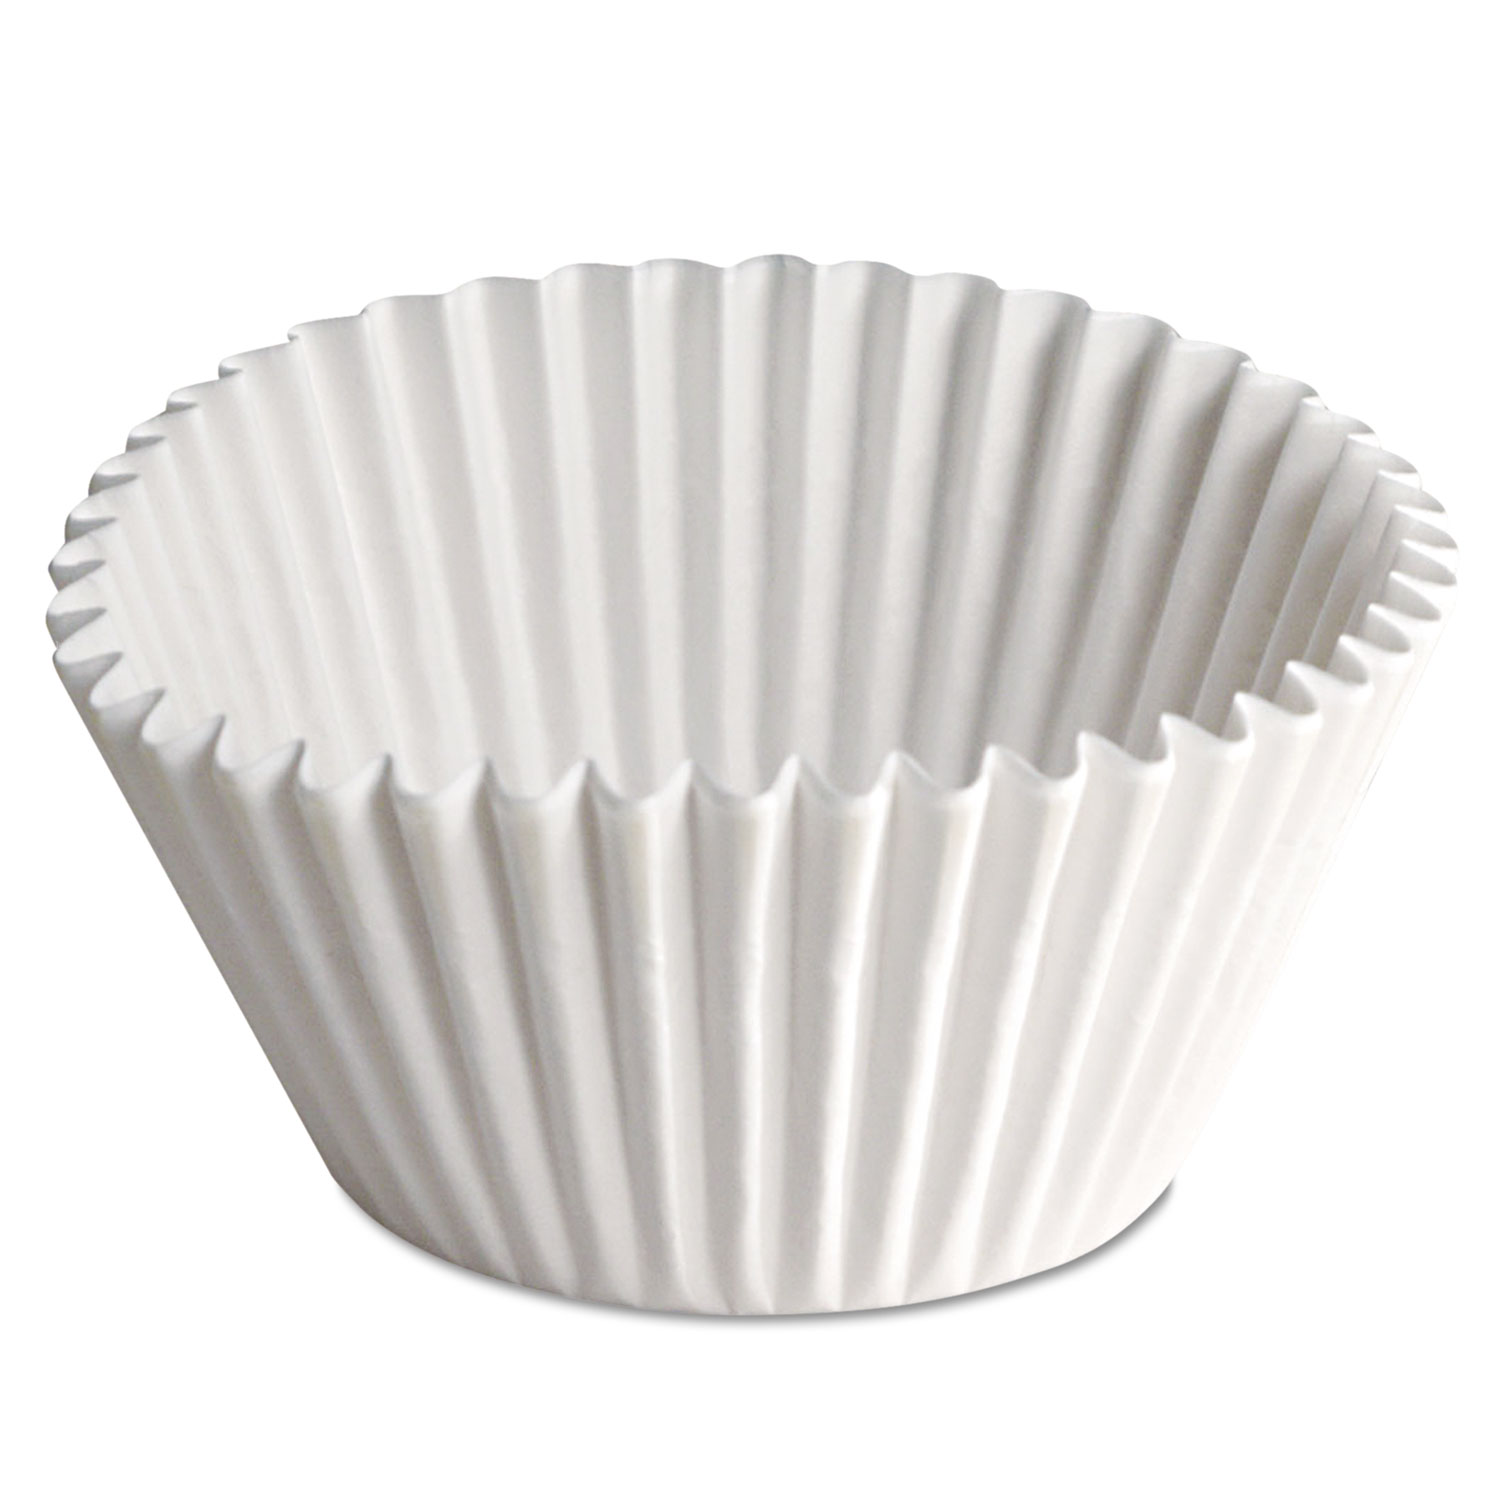  Hoffmaster 610070 Fluted Bake Cups, 2 1/4 dia x 1 7/8h, White, 500/Pack, 20 Pack/Carton (HFM610070) 